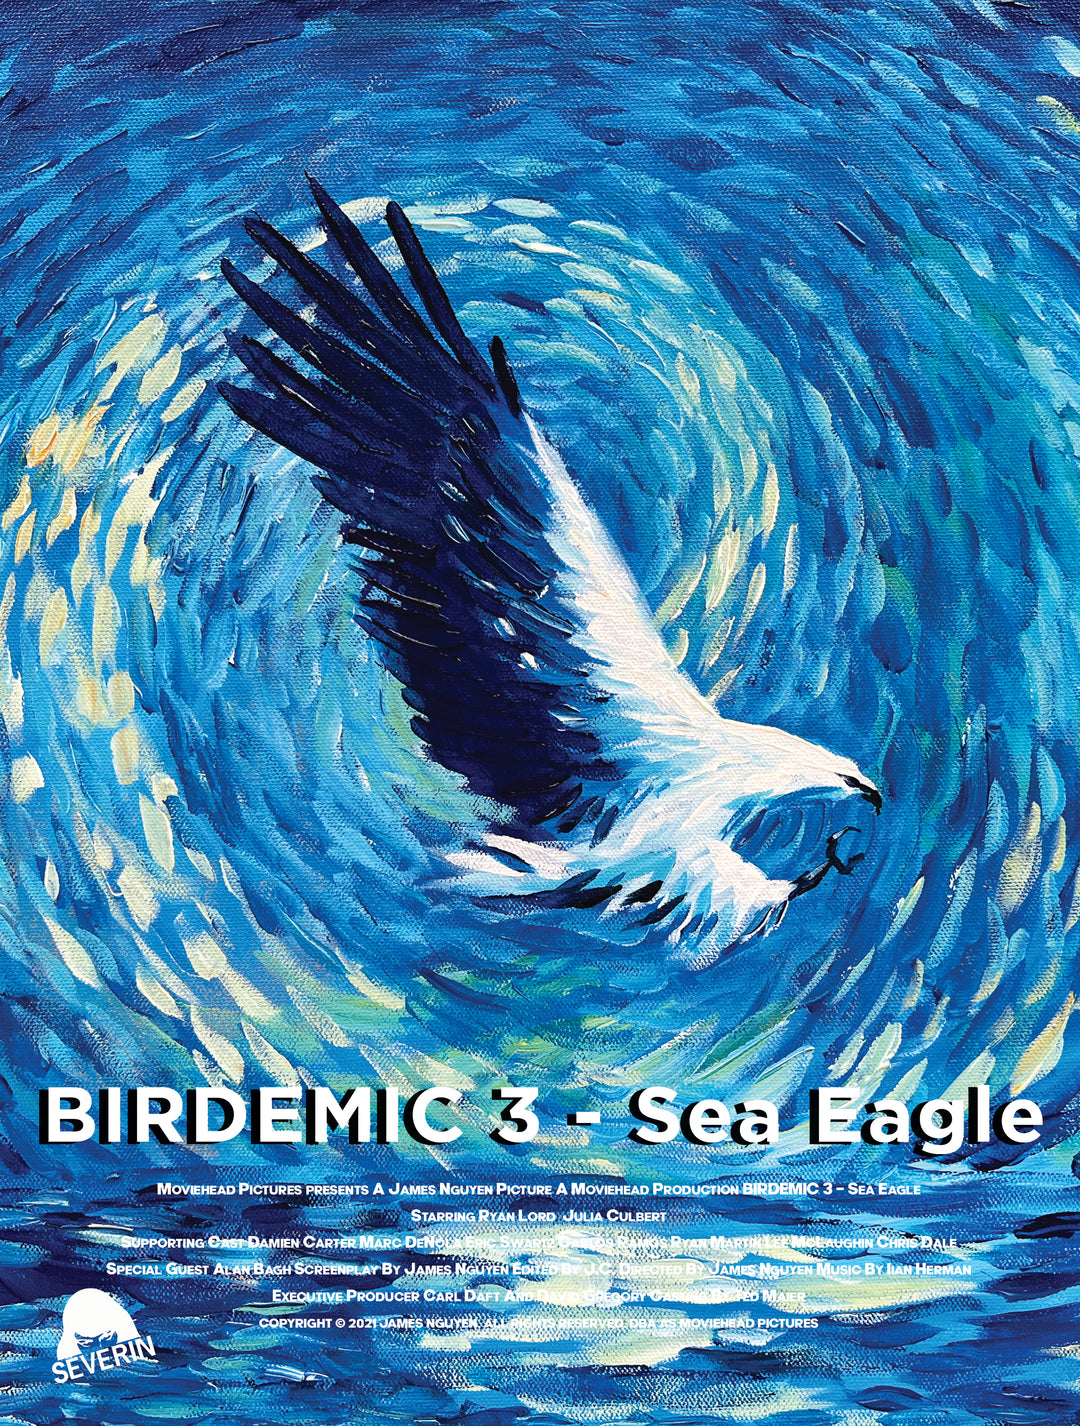 WATCH BIRDEMIC 3 - SEA EAGLE AT HOME NOW!